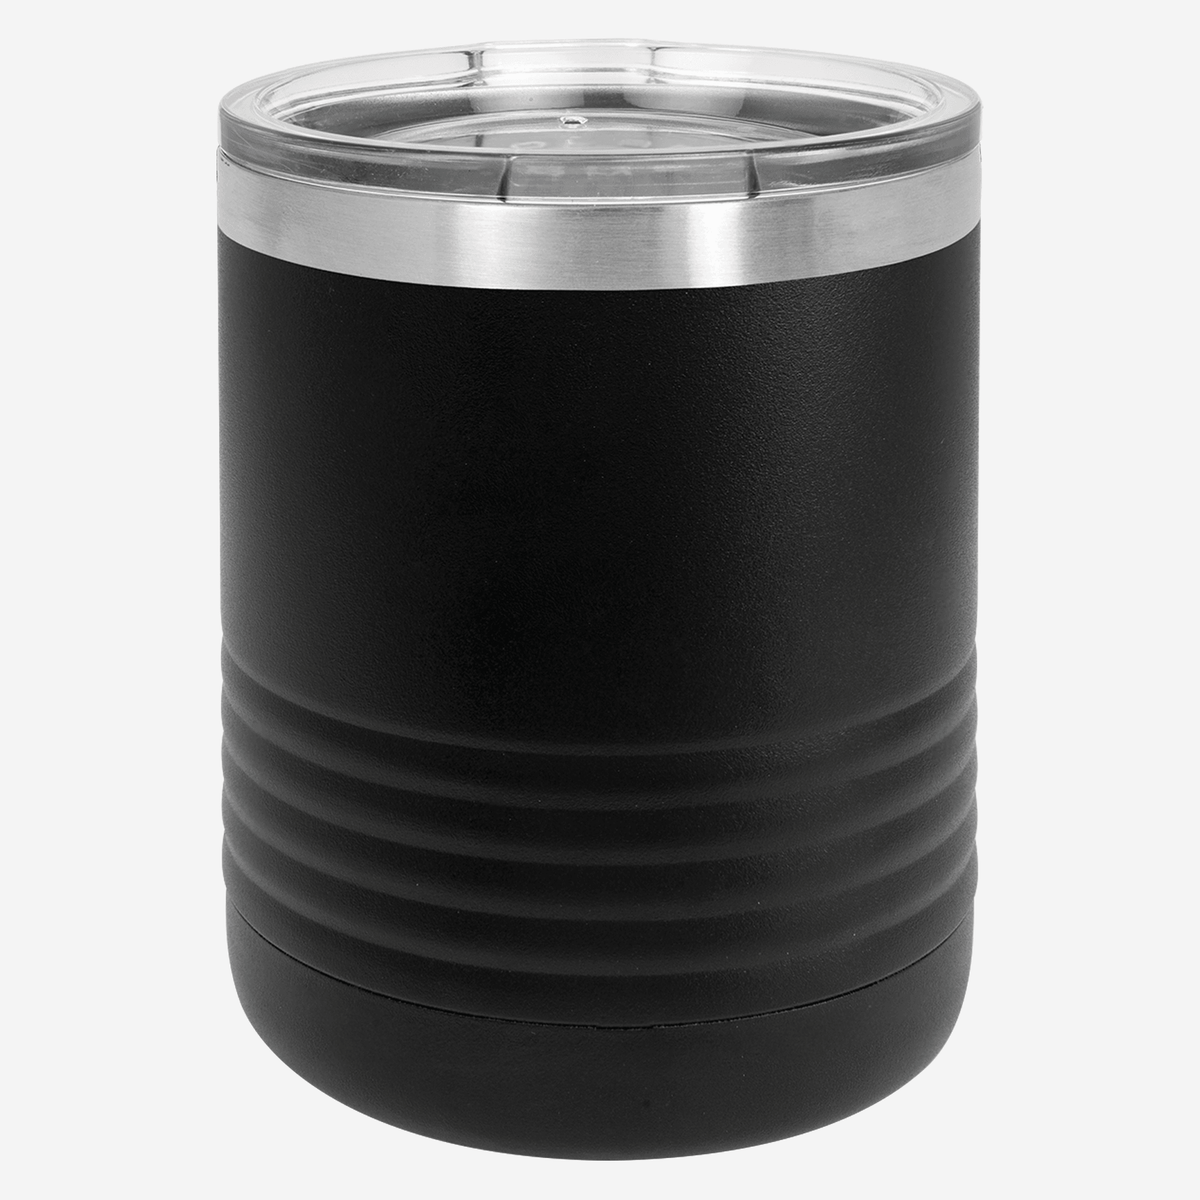 10 oz black tumbler with lid grip rings on the bottom